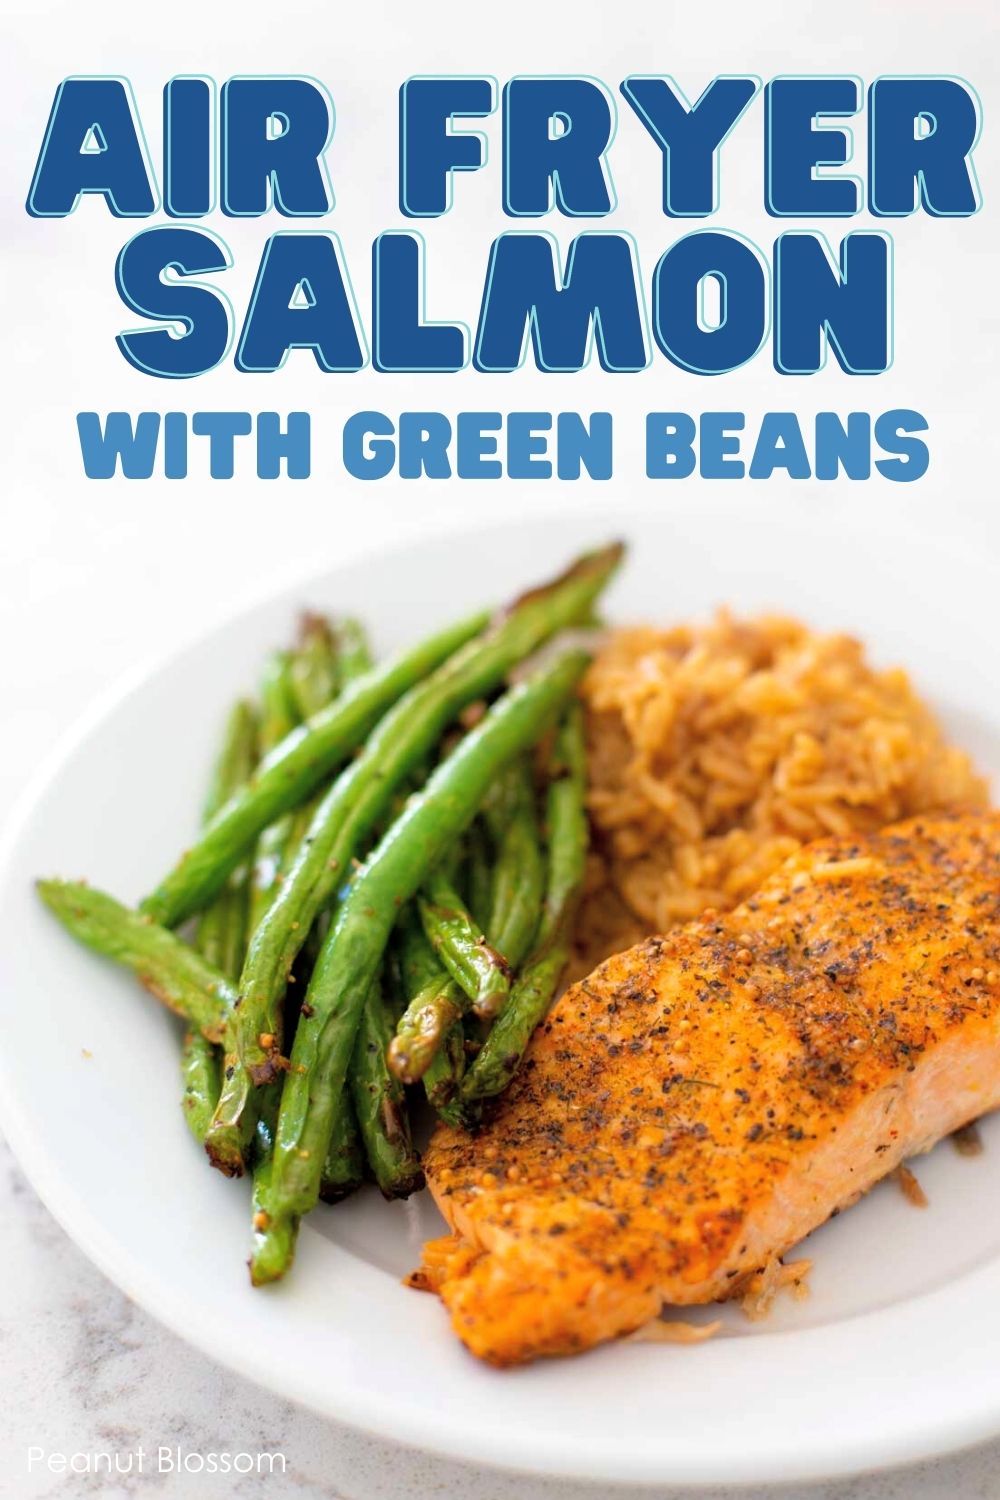 The cooked salmon sits on a plate next to air fryer green beans and a scoop of rice.